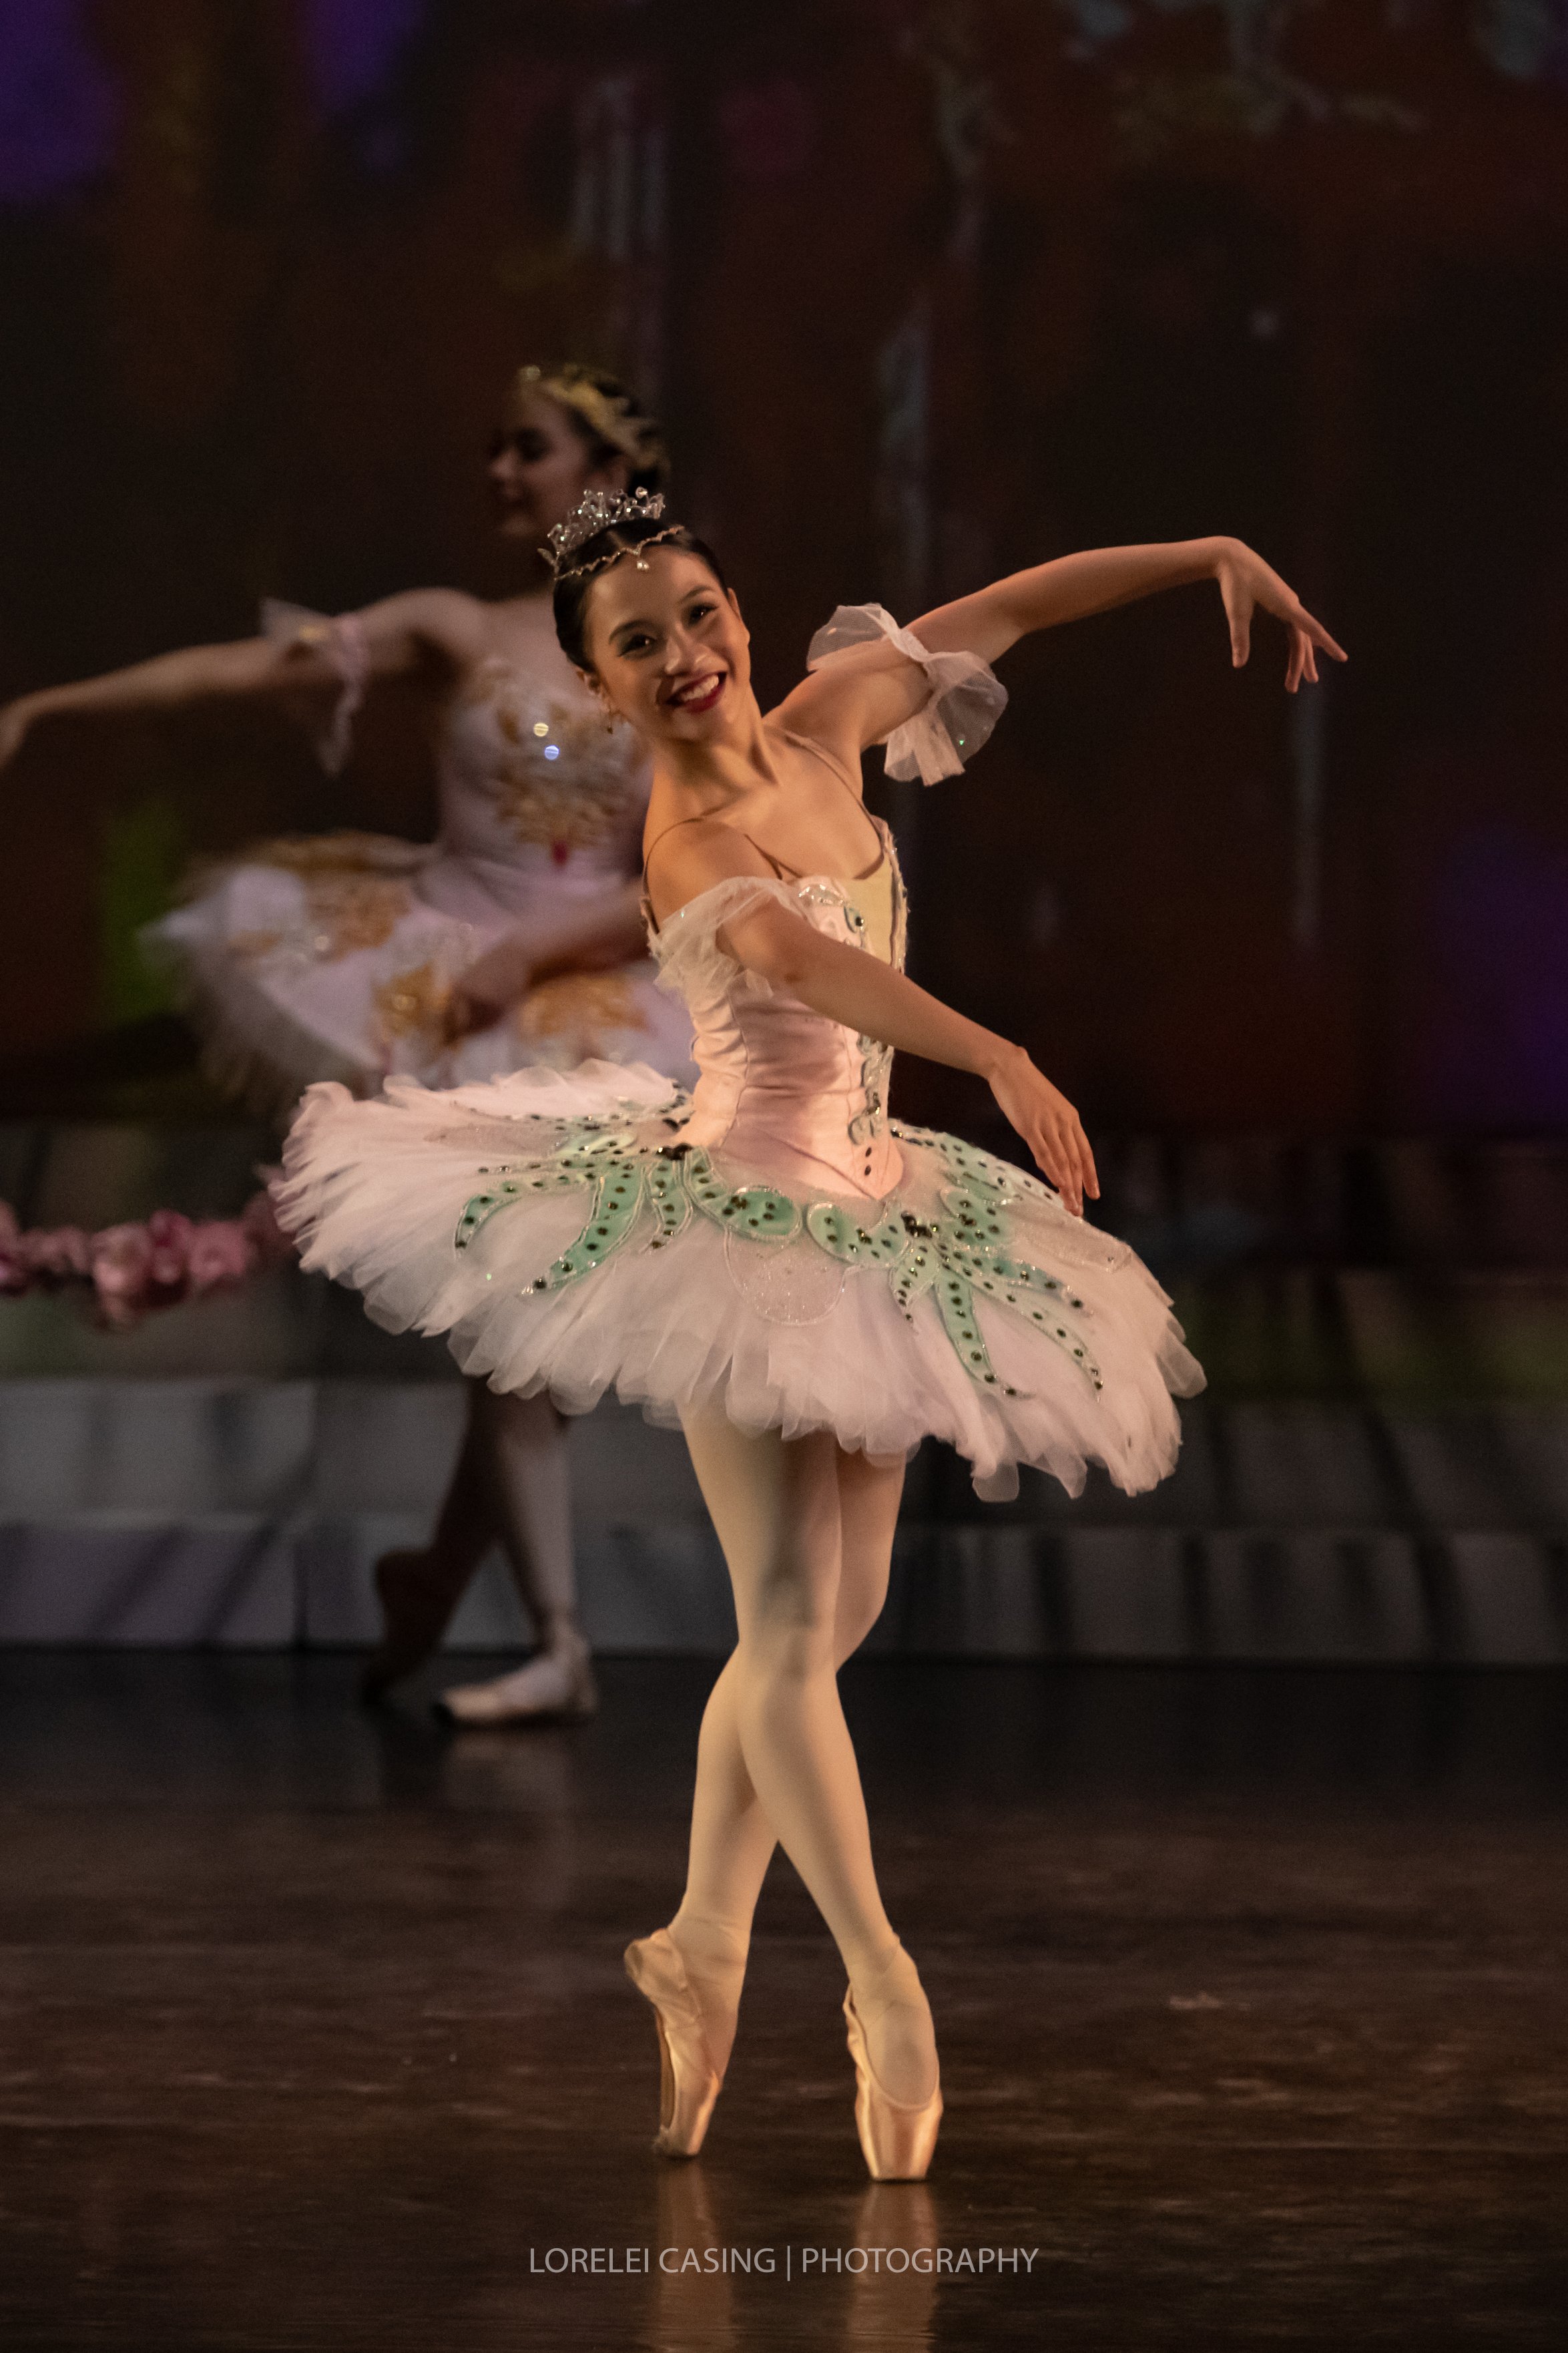    The subtle pink hue of Jasmine Pia Dames’ tutu as Gulnara (from  Le Corsaire,  2018) reflects the quiet strength that her character possesses as she comes to her friend Medora’s assistance through the many adventures they undergo in the pirate epi